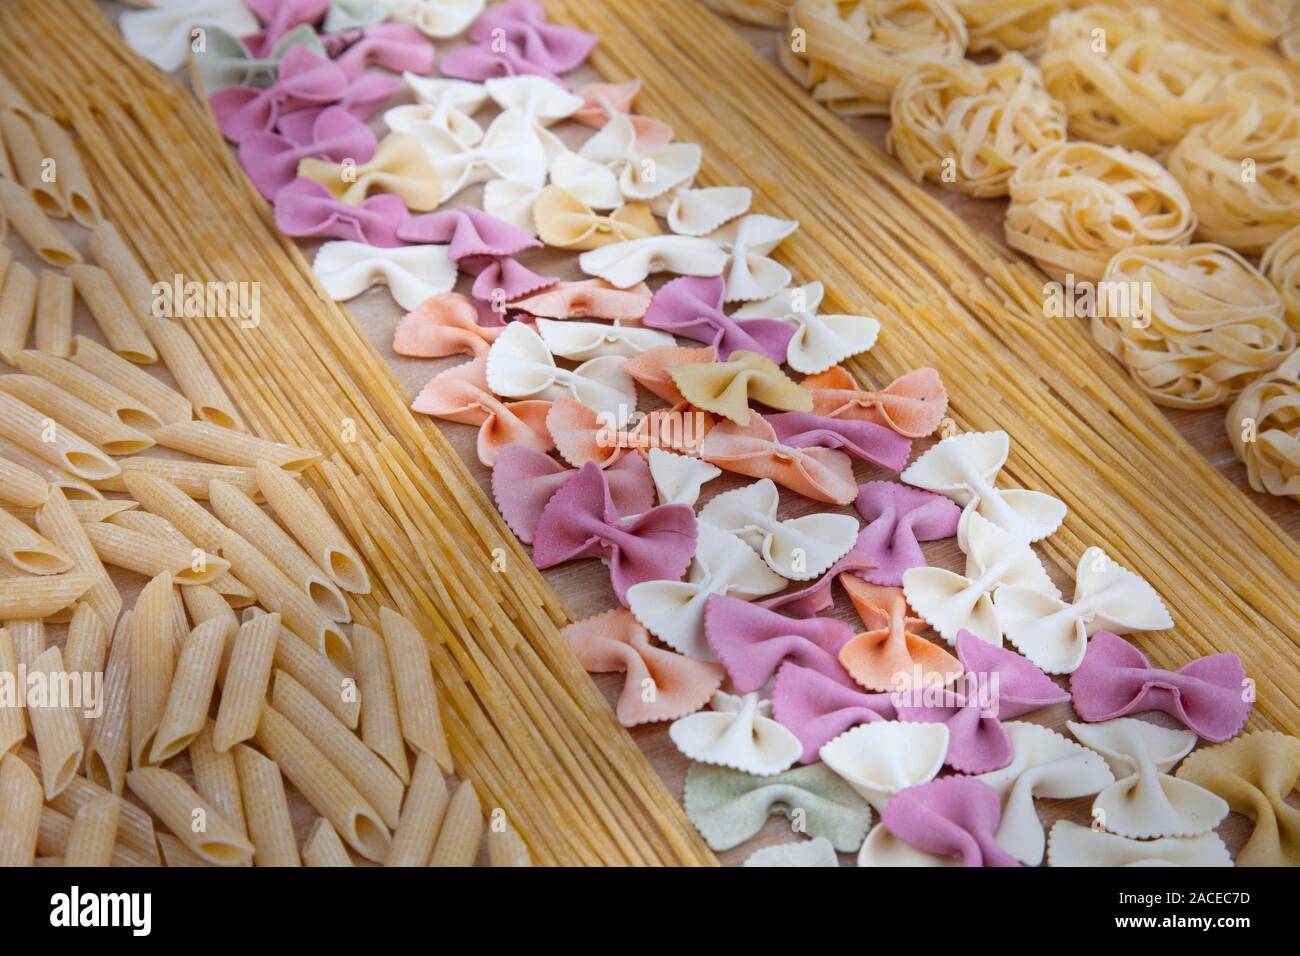 Assorted uncooked pasta in rows Stock Photo